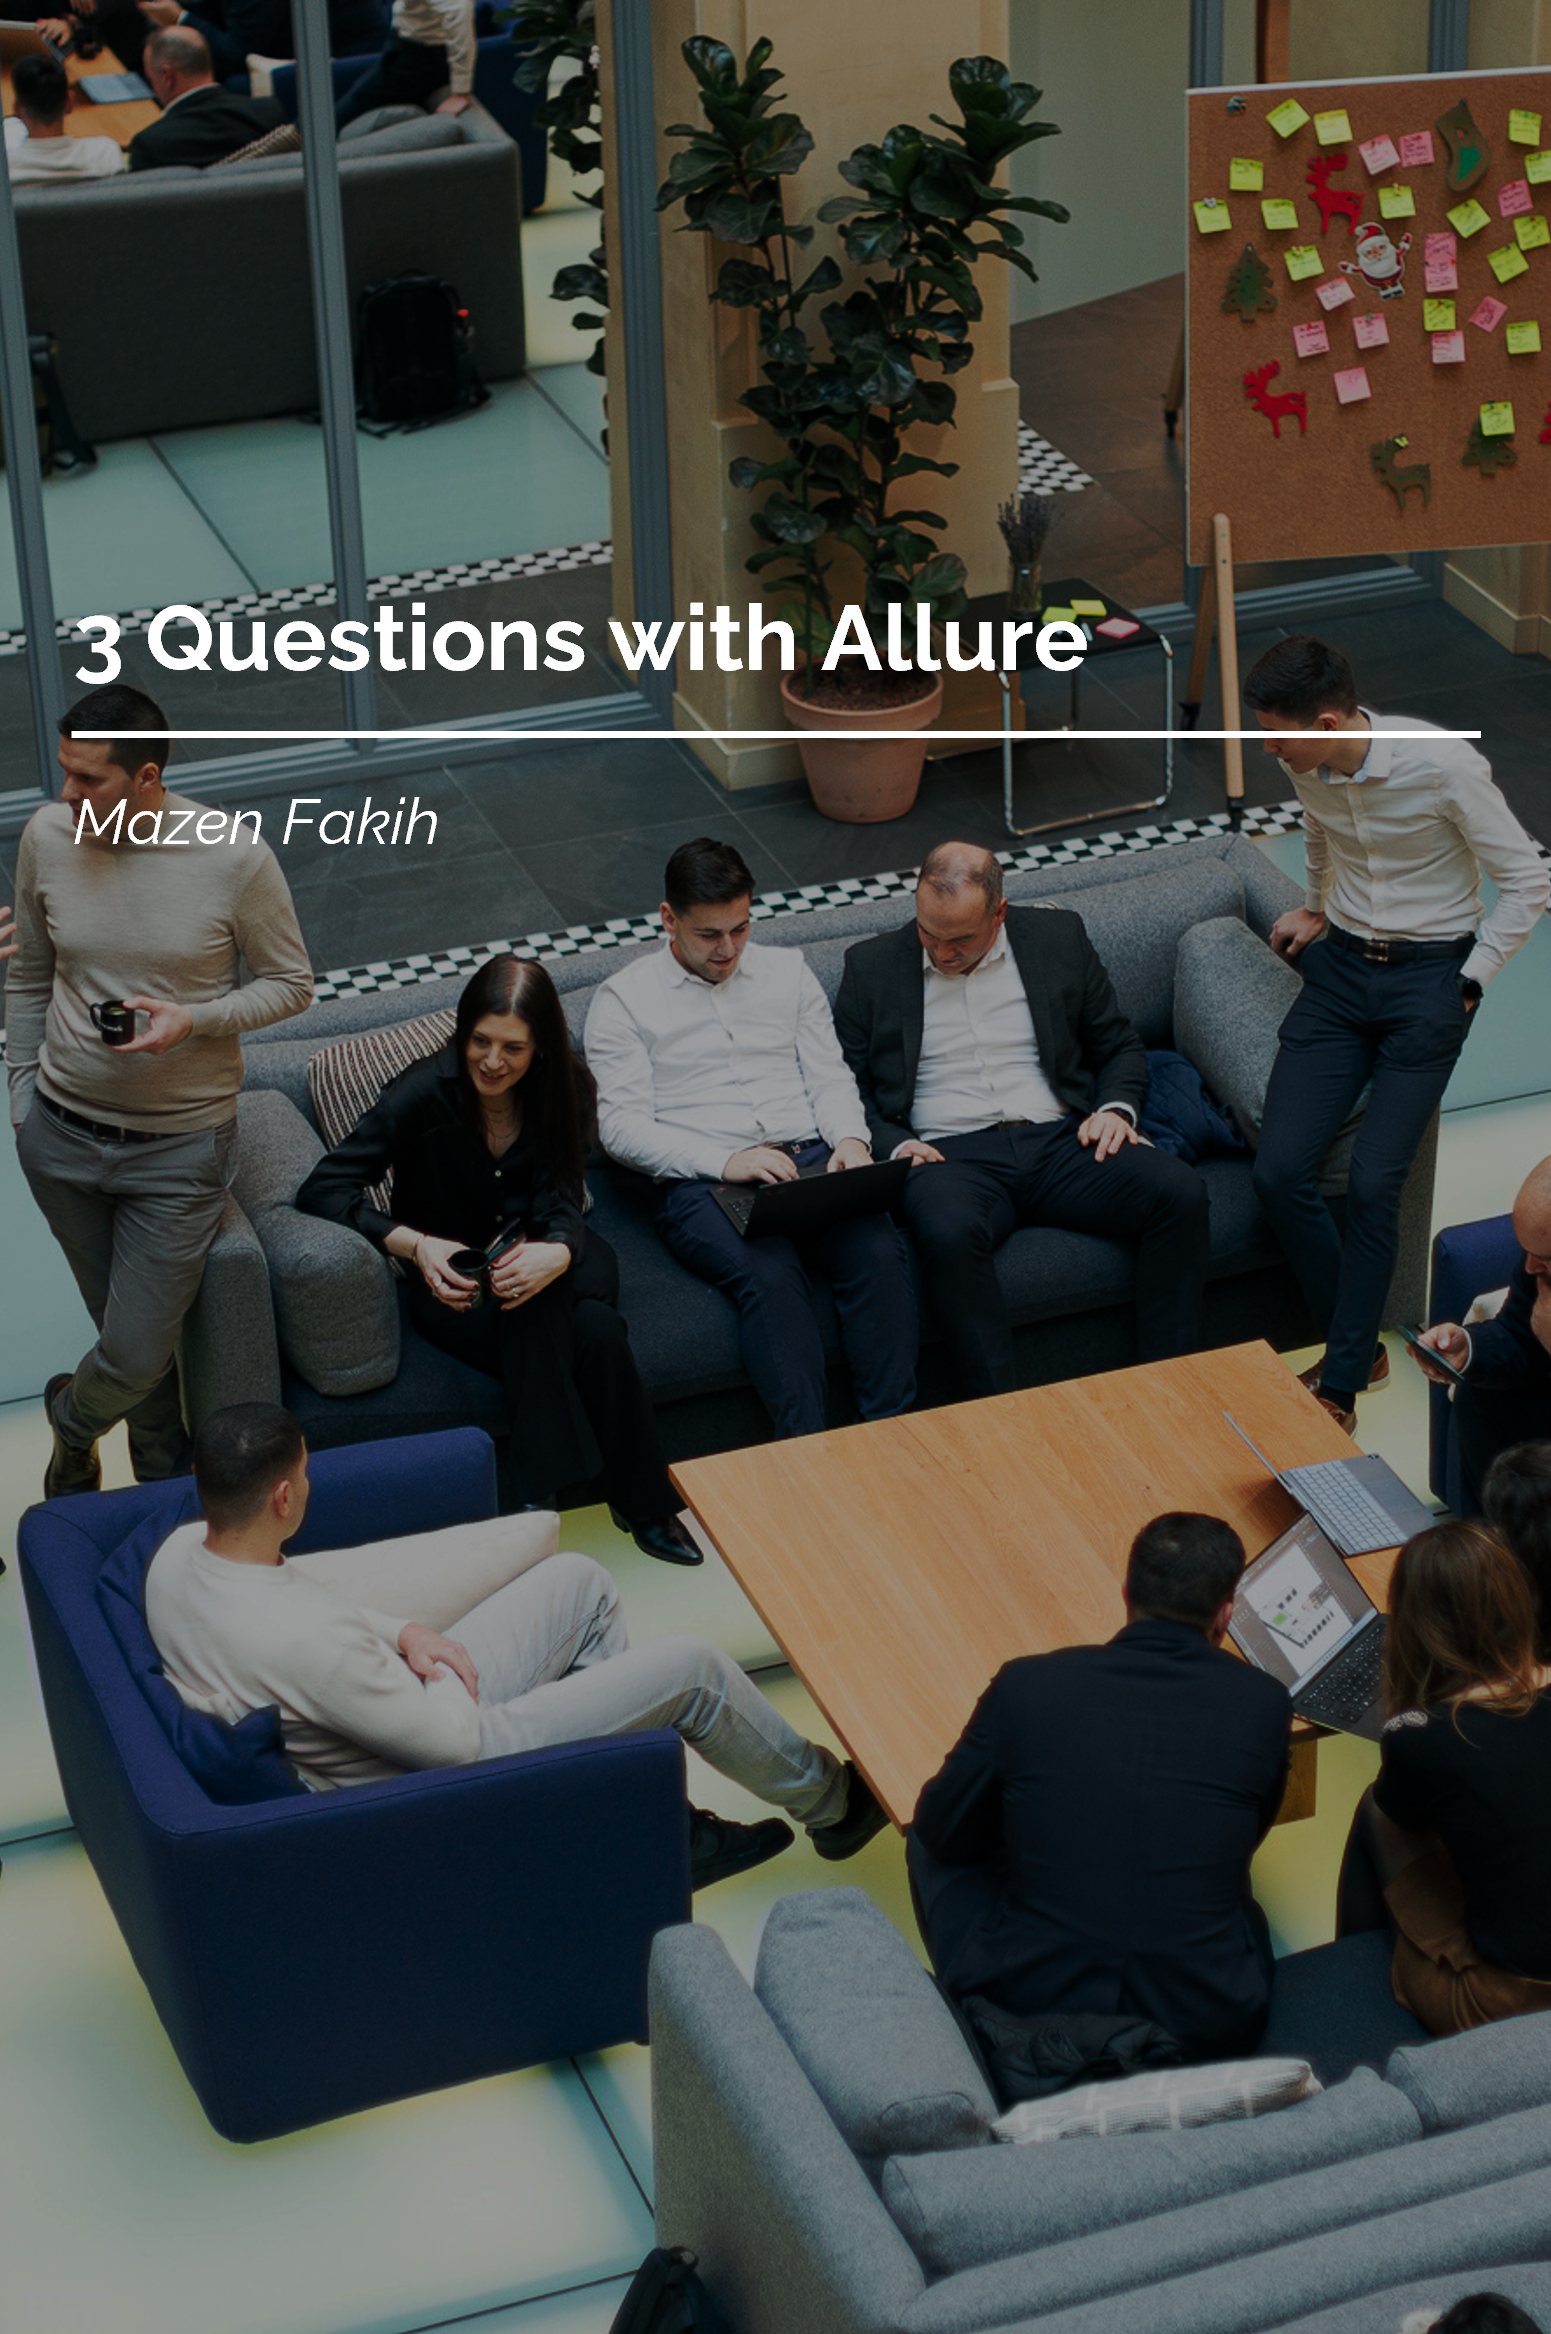 3 QUESTIONS WITH ALLURE